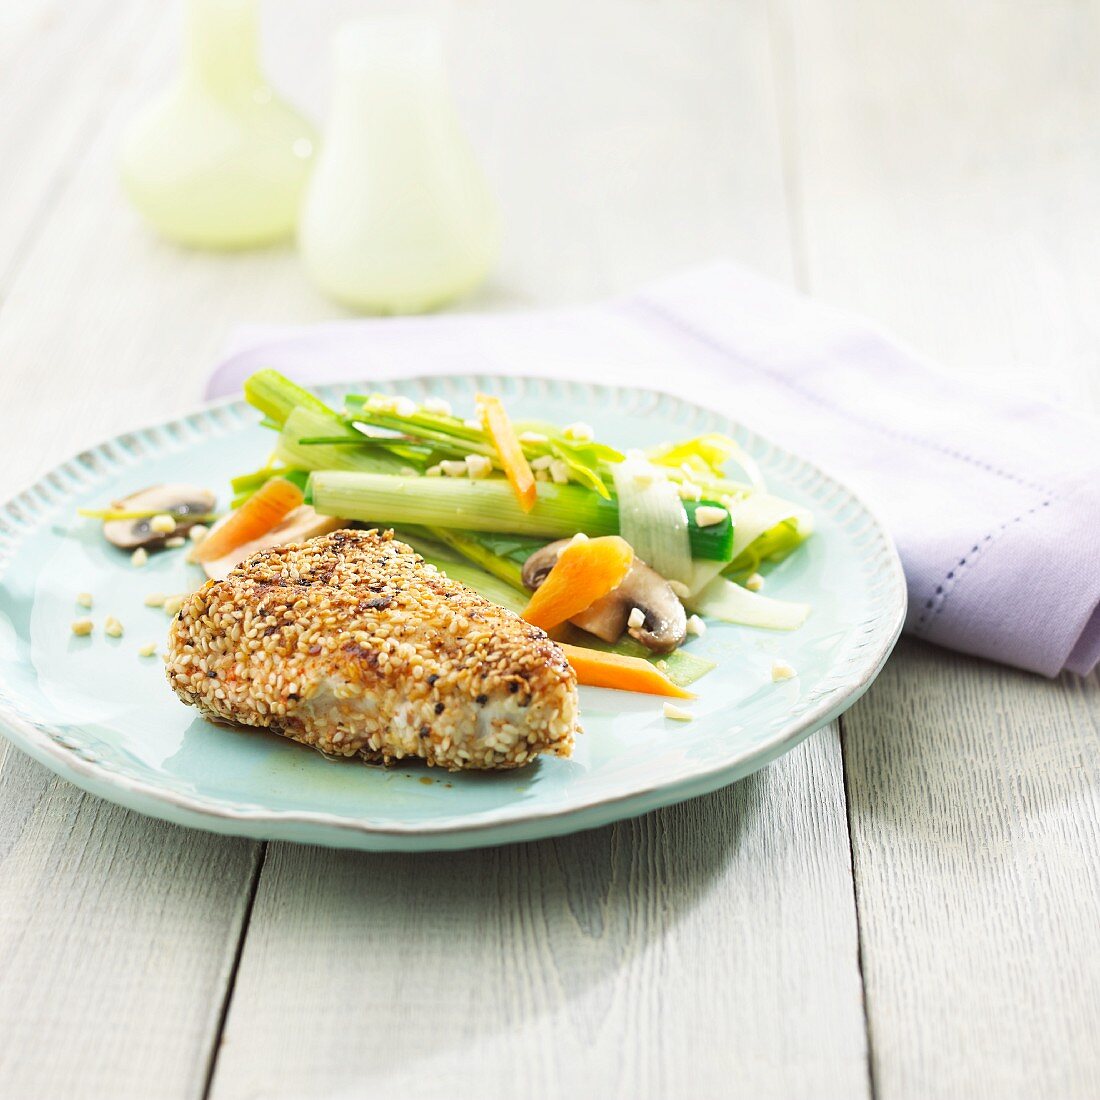 Chicken breast fillet with a sesame seed coating with a delicate leek medley